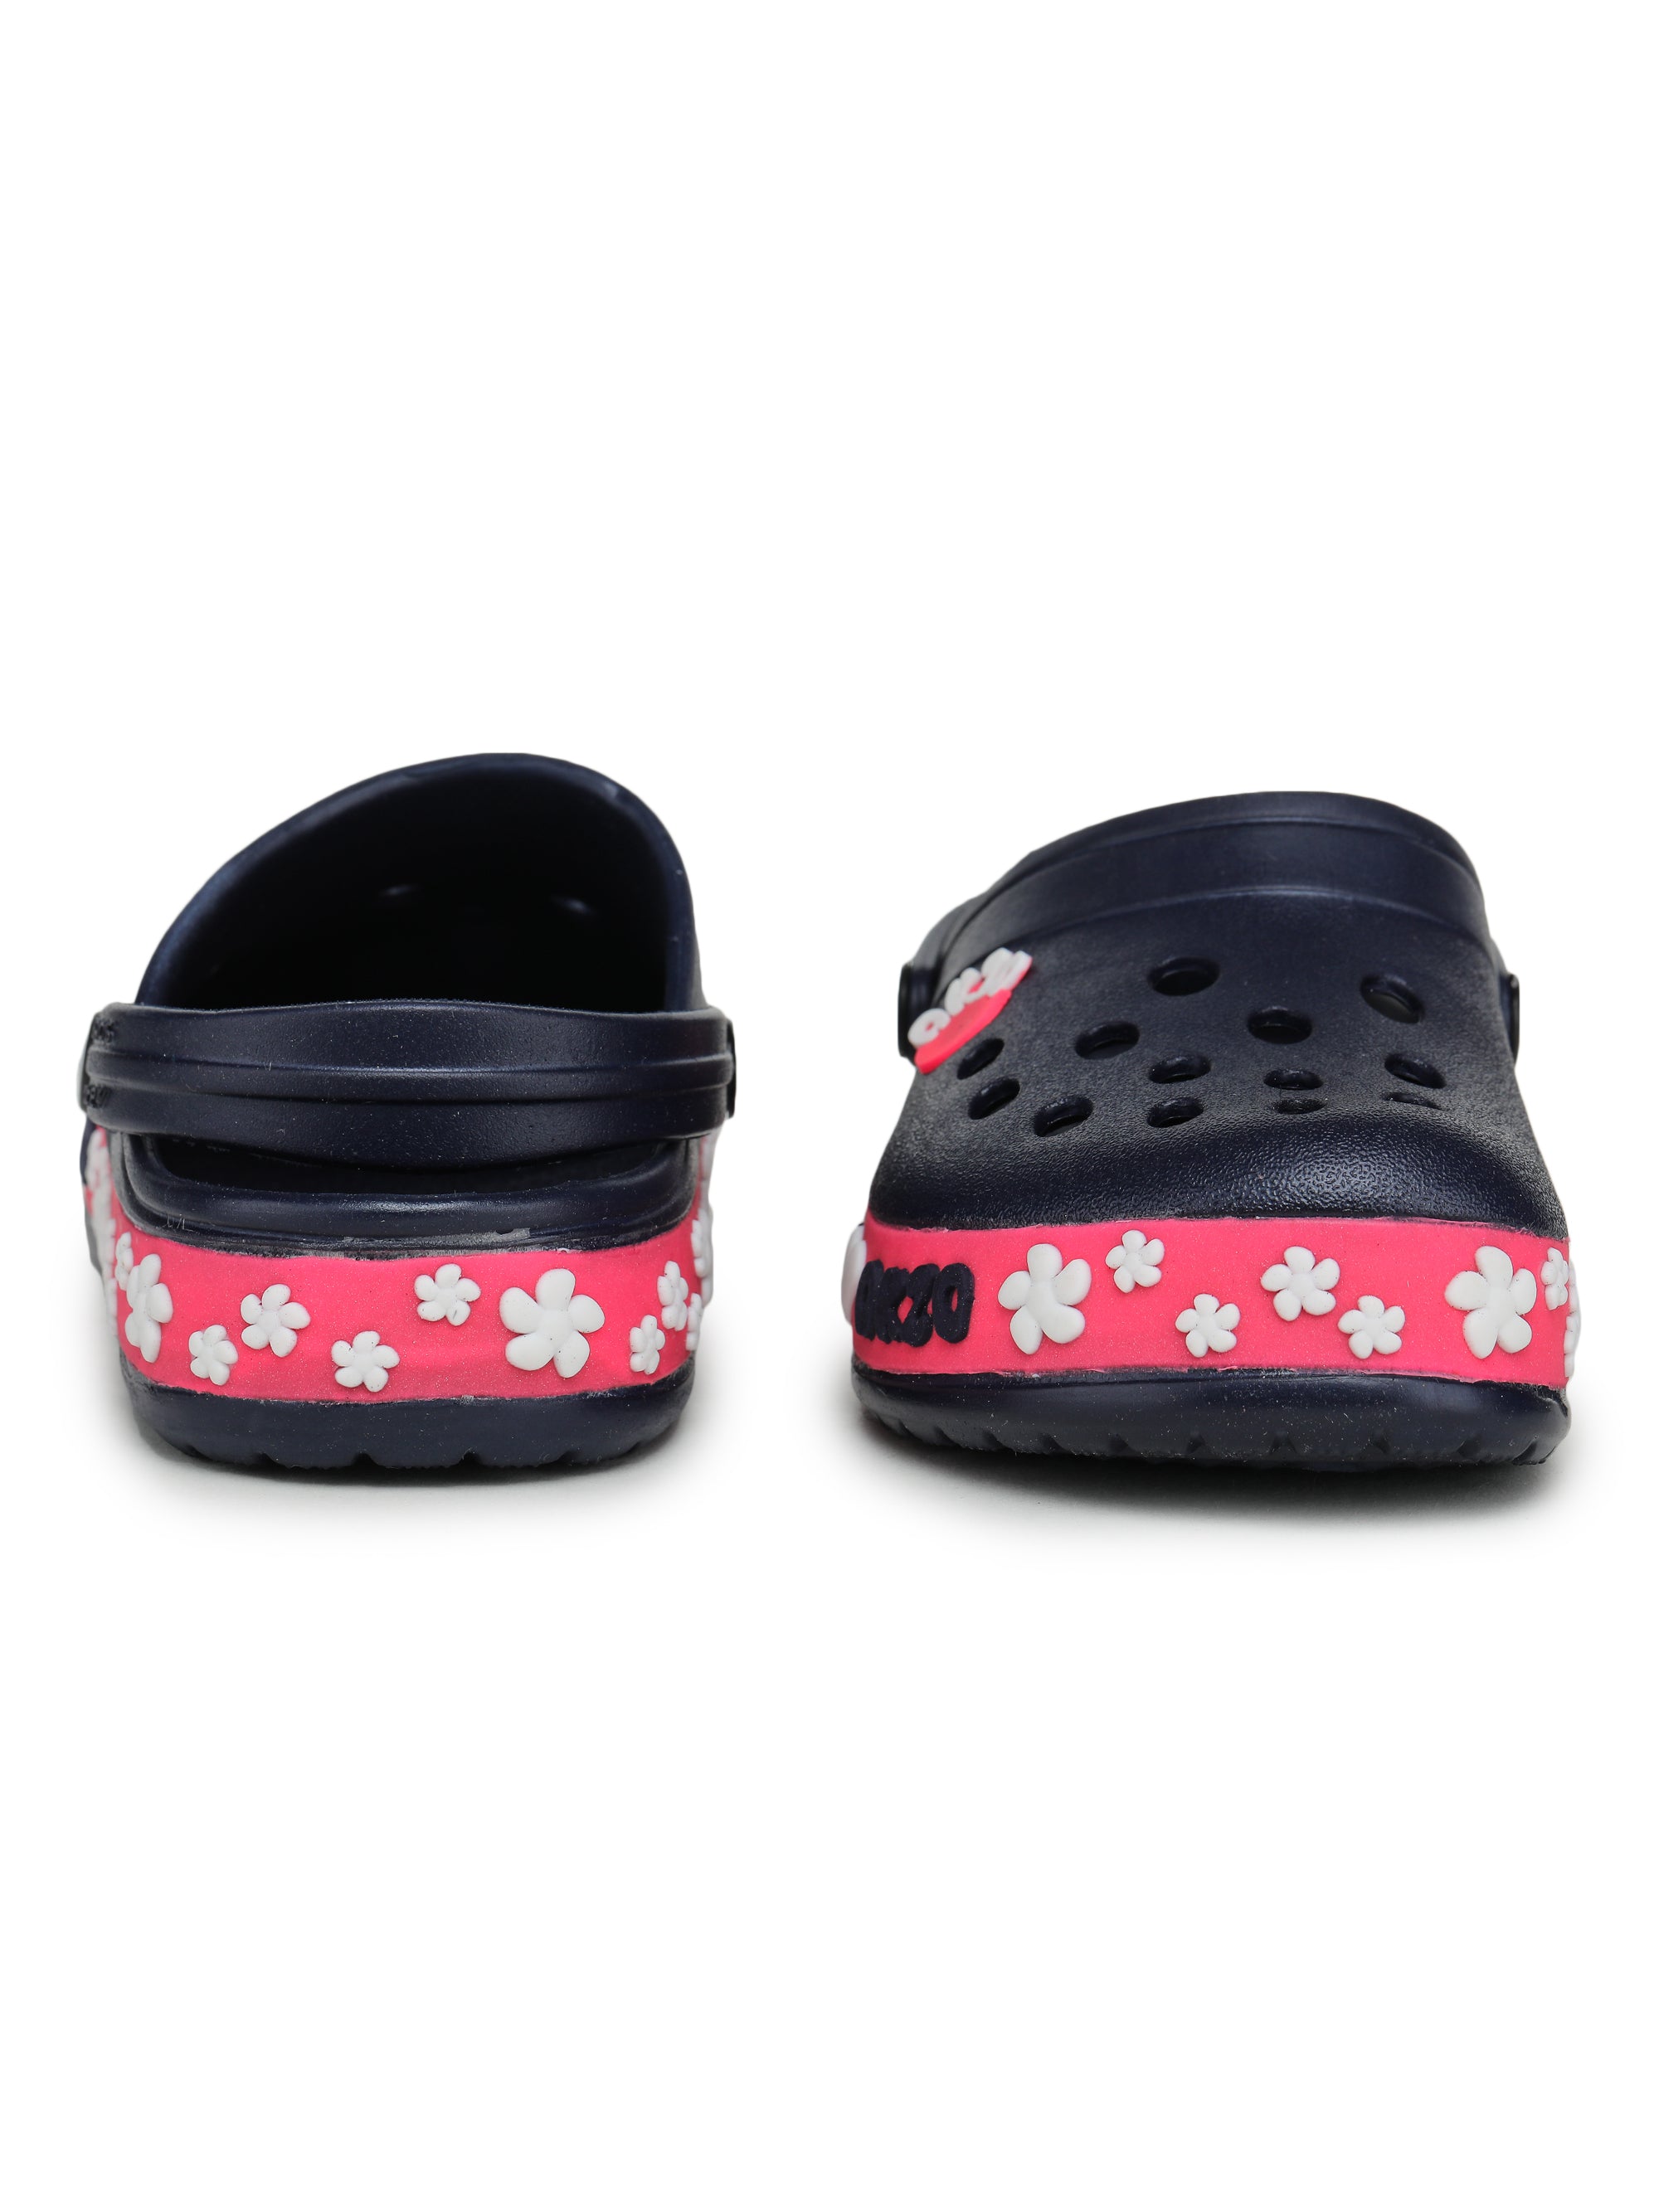 ZCL-2001 CLOGS FOR WOMENS